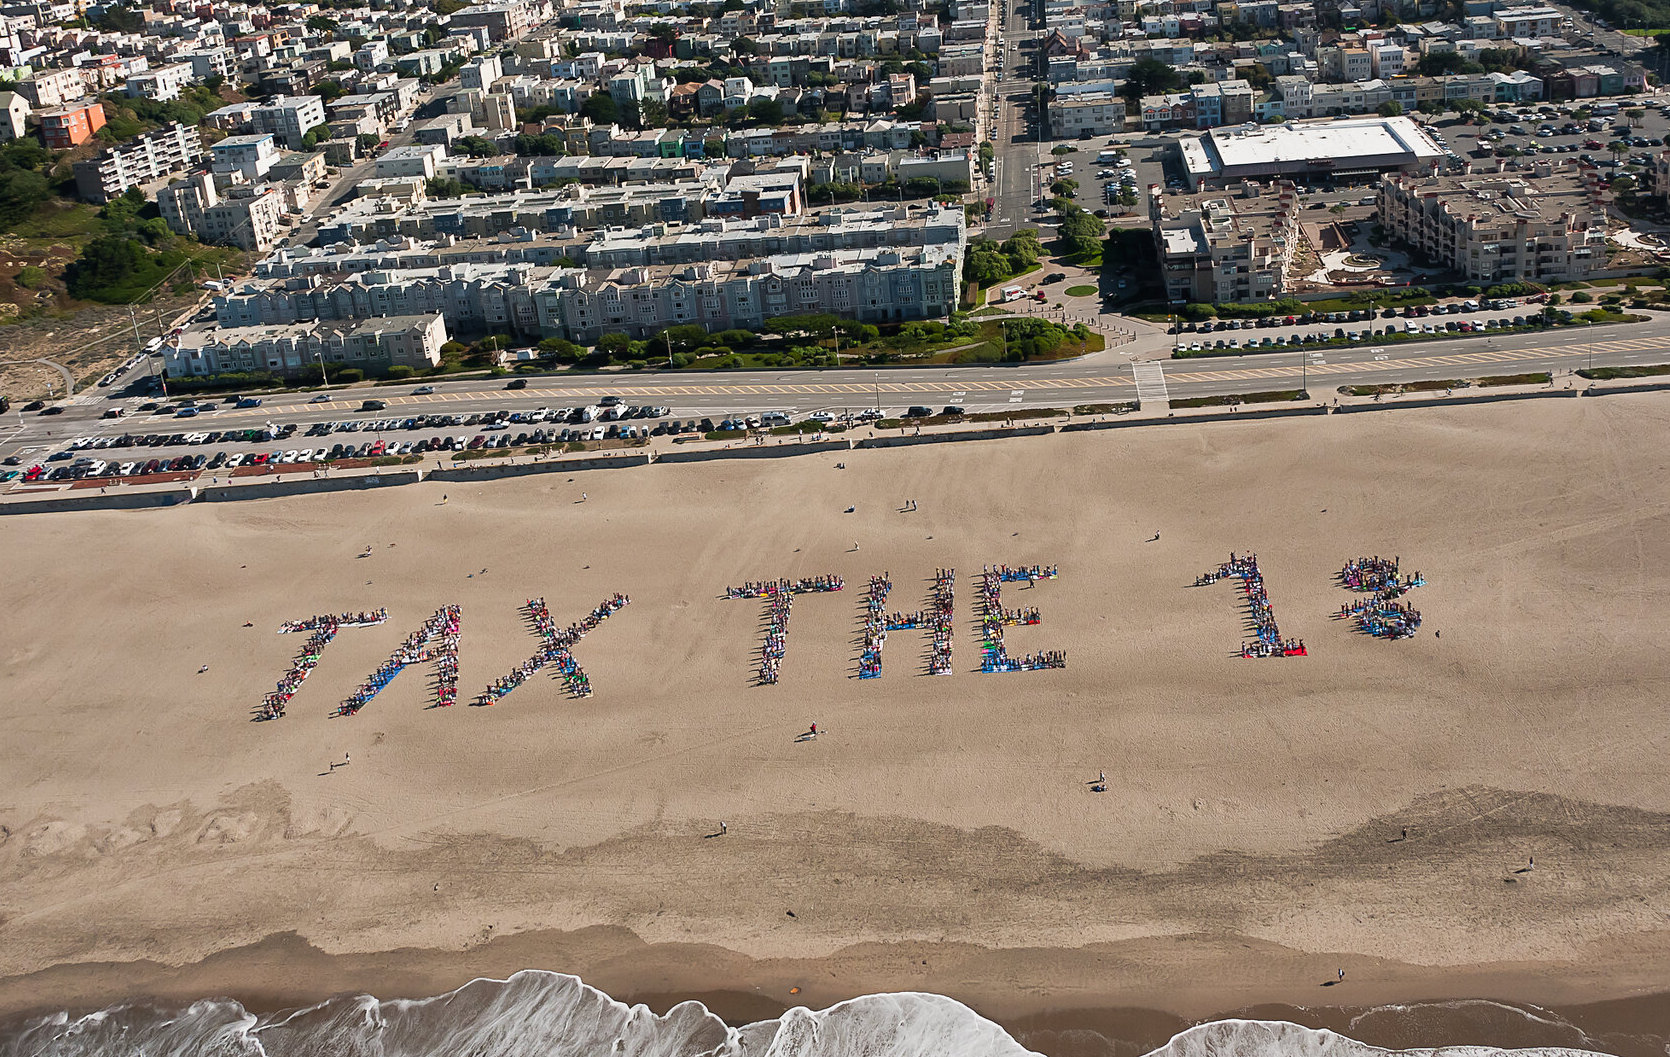 People on a beach spell out the phrase "Tax the 1%."